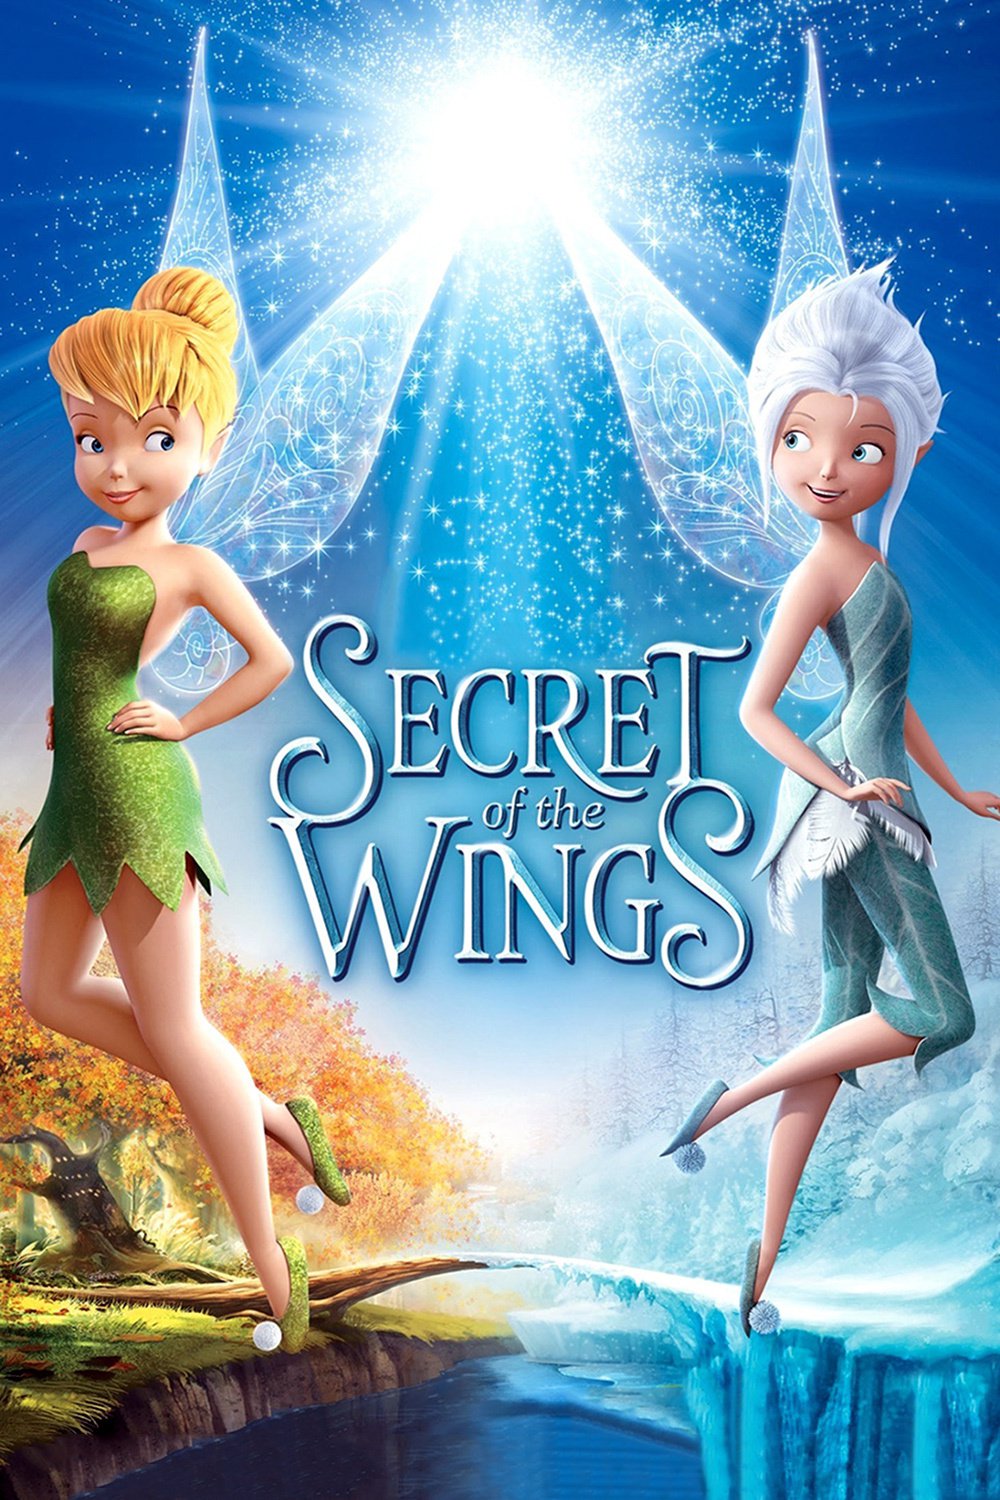 Poster for the movie "Secret of the Wings"